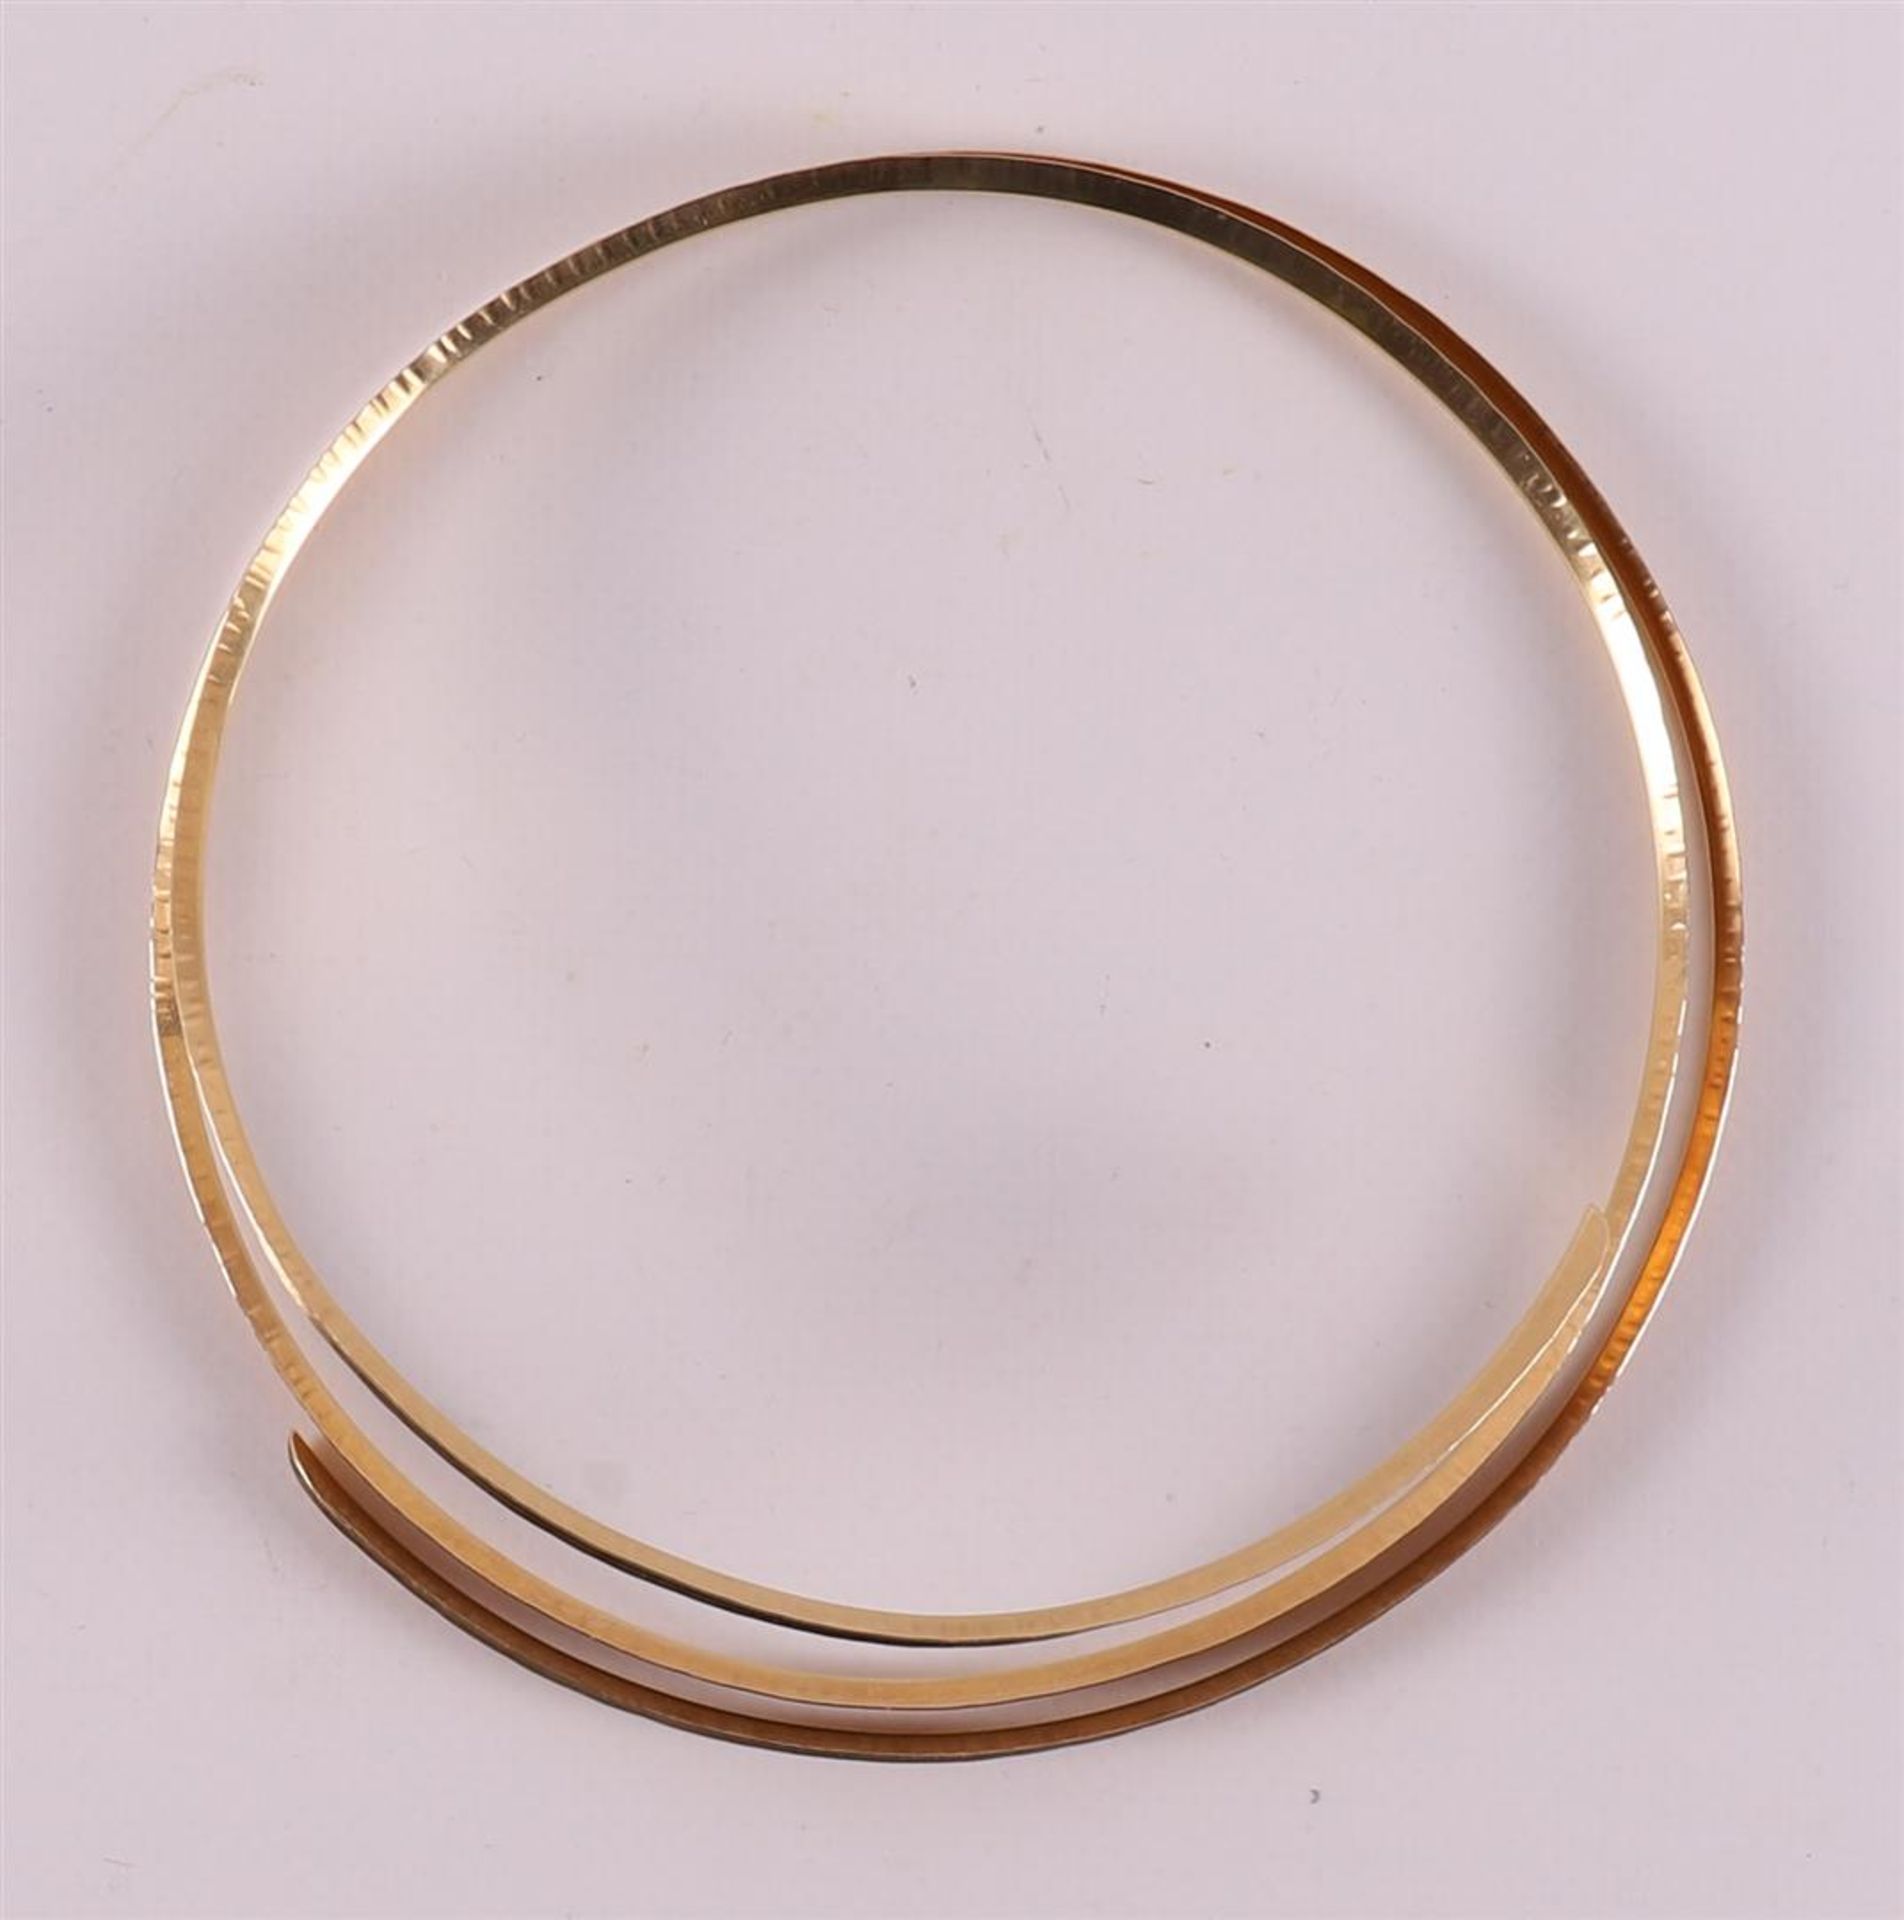 A round spiral matted 14 kt 585/1000 yellow gold choker. - Image 3 of 4